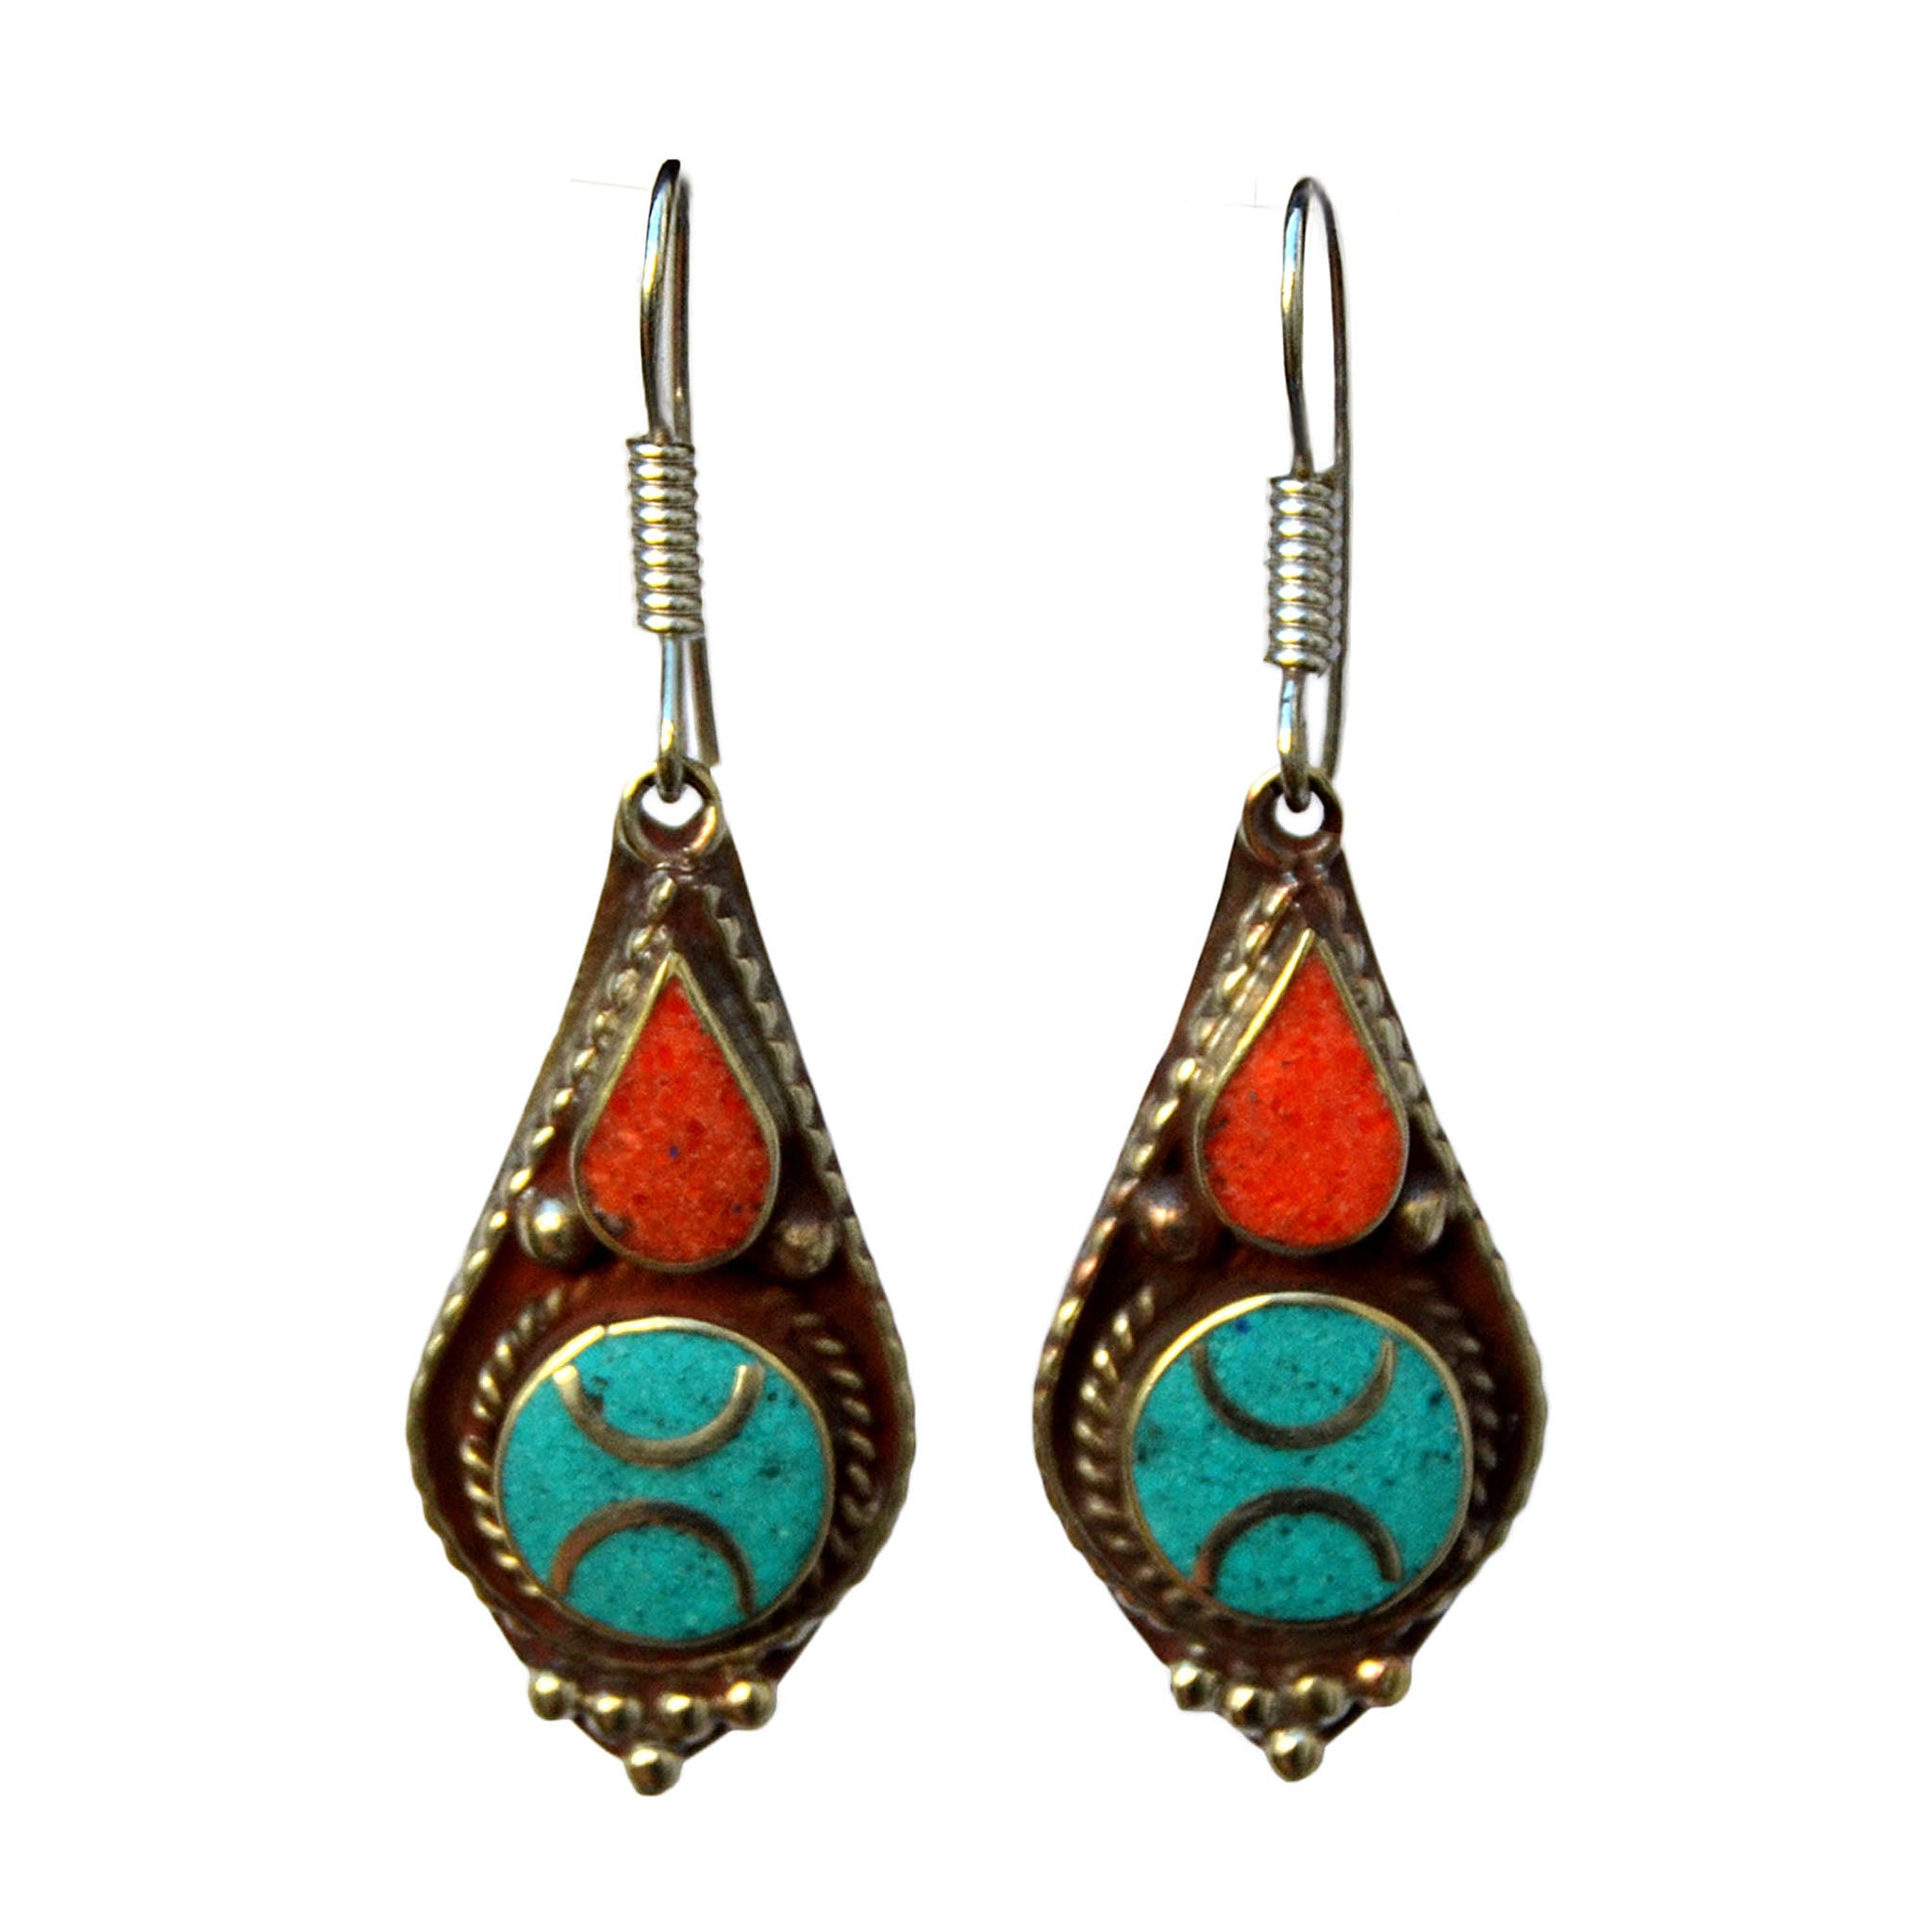 Tribal tibetan drop earrings with inlay turquoise and red coral stones